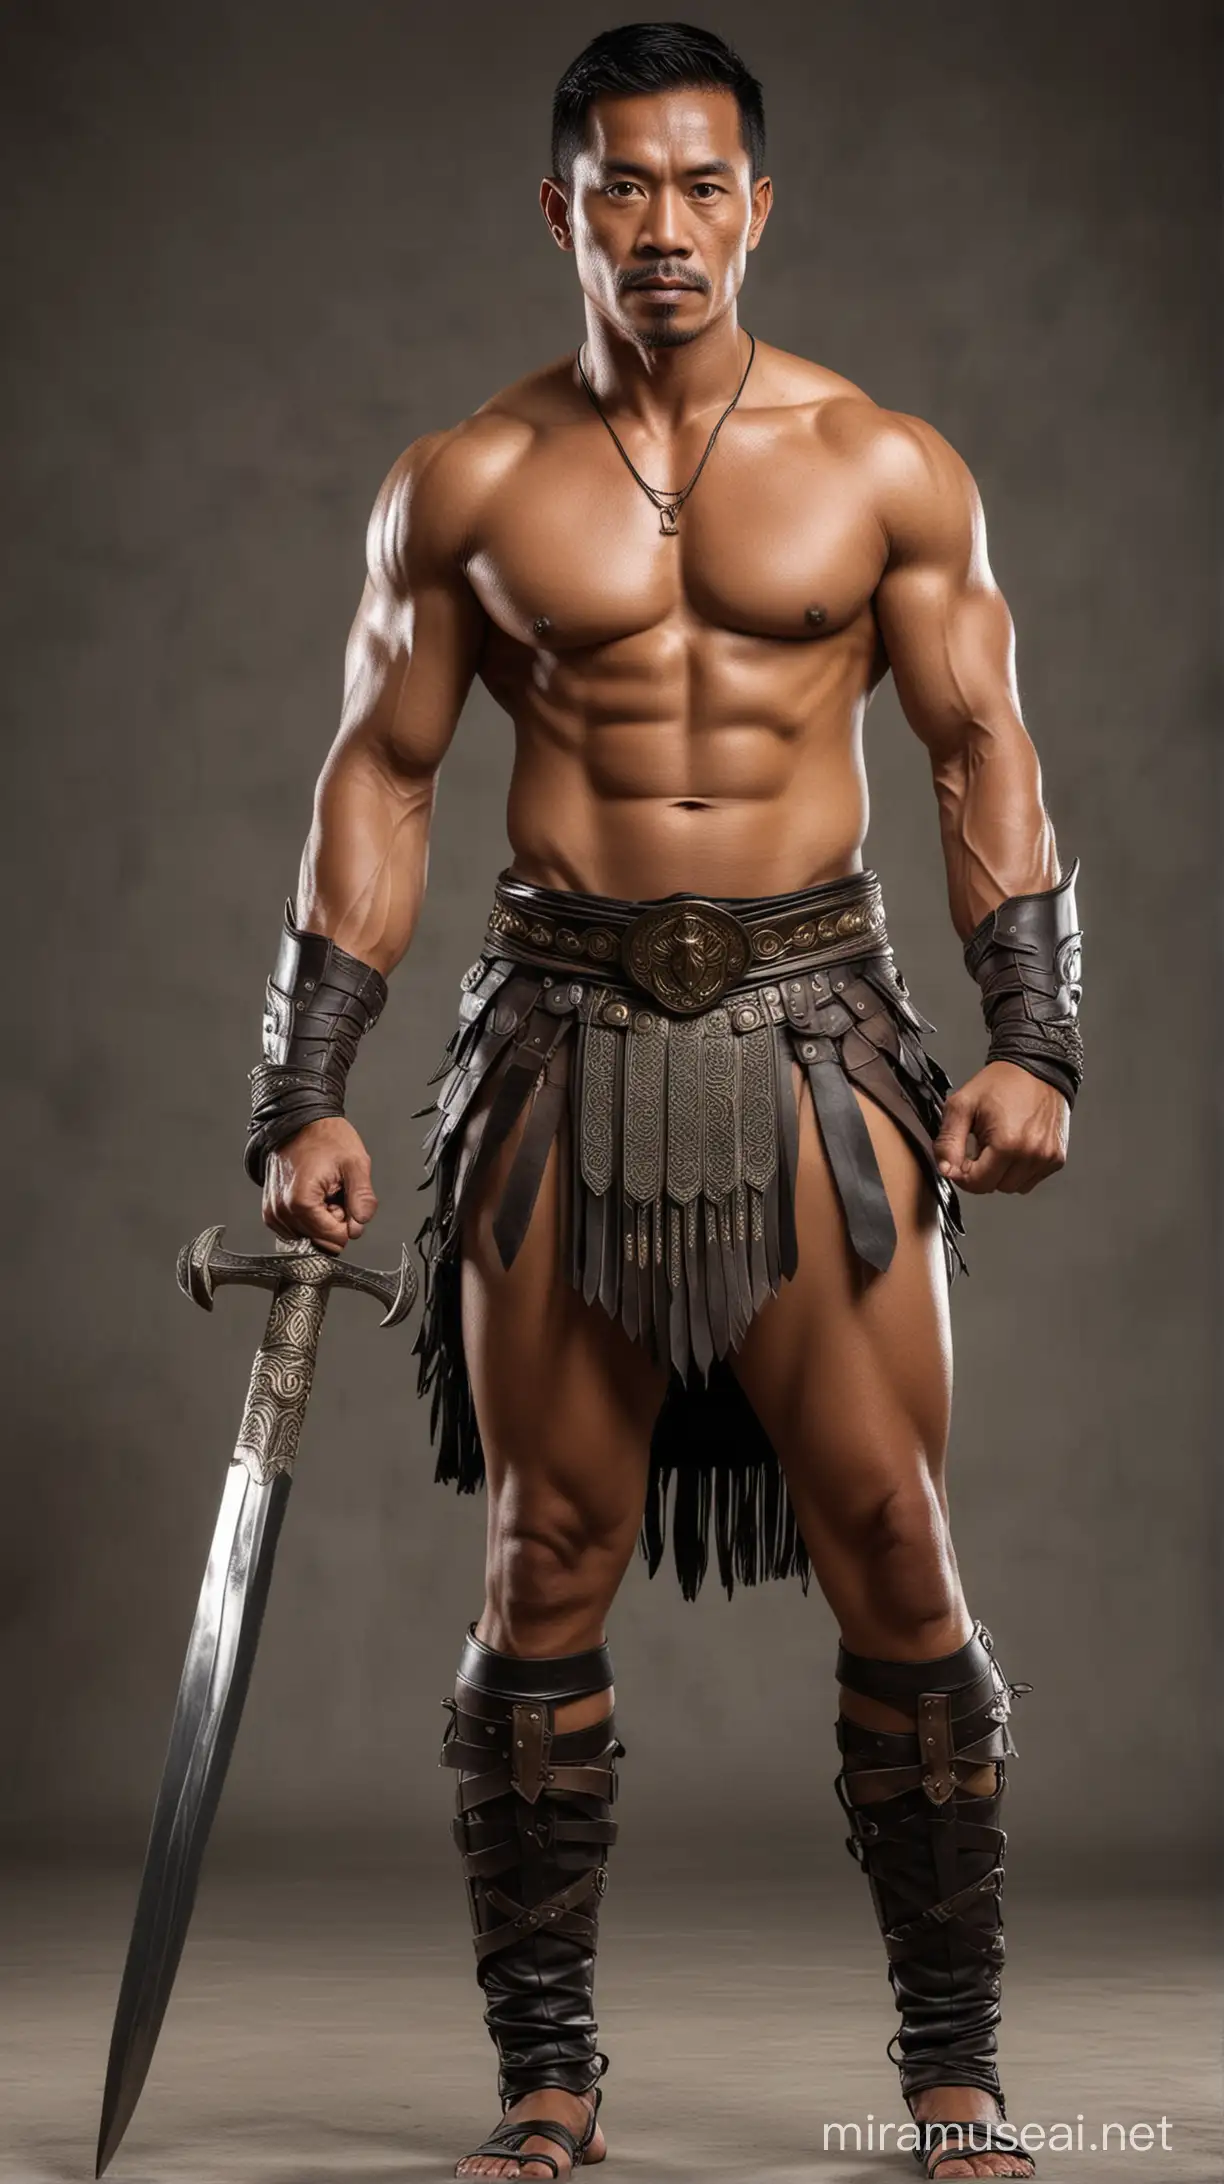 Indonesian warrior, 46 years old, handsome, athletic, full body.